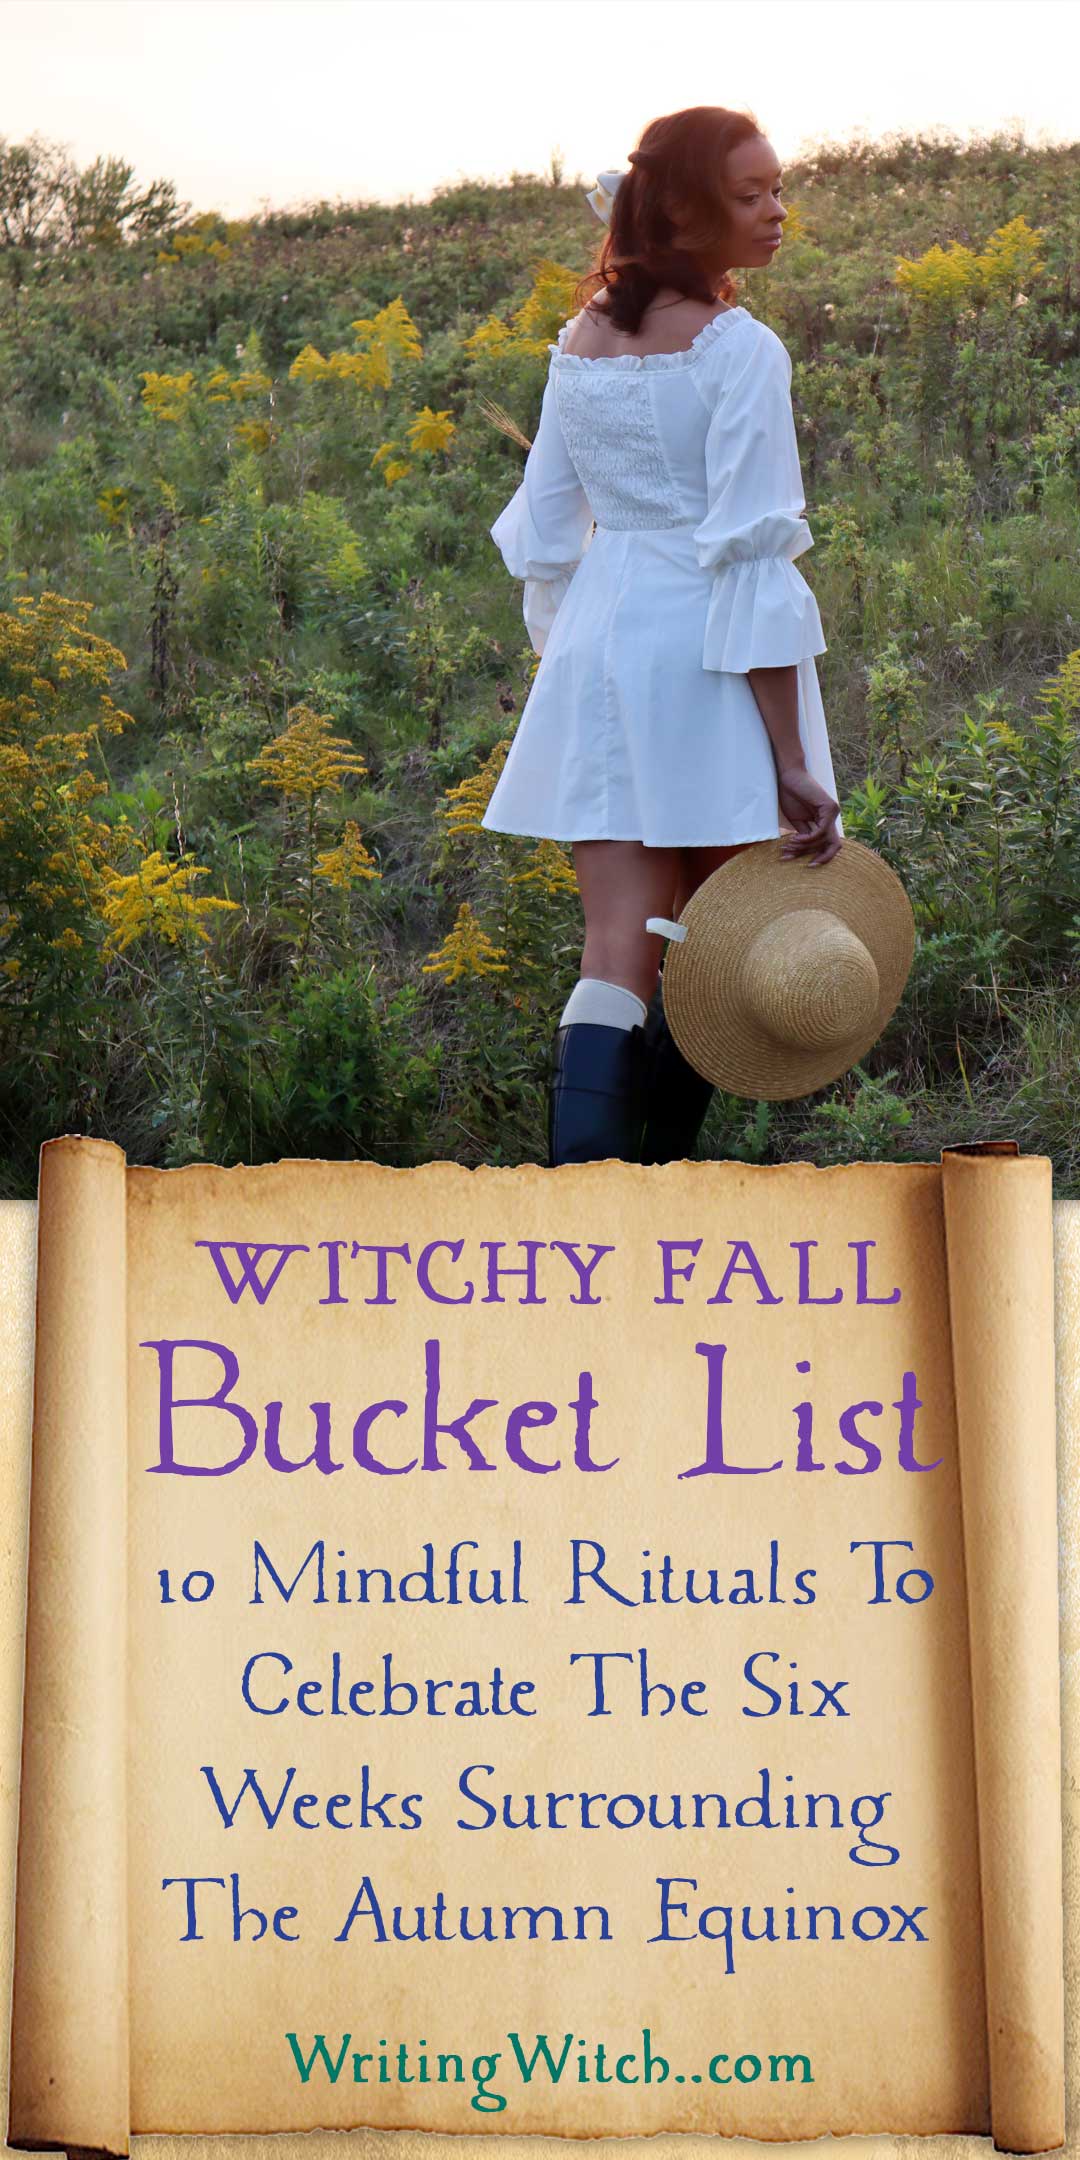 Early Fall Bucket List: 10 Witchy Rituals to Celebrate the Autumn Equinox!